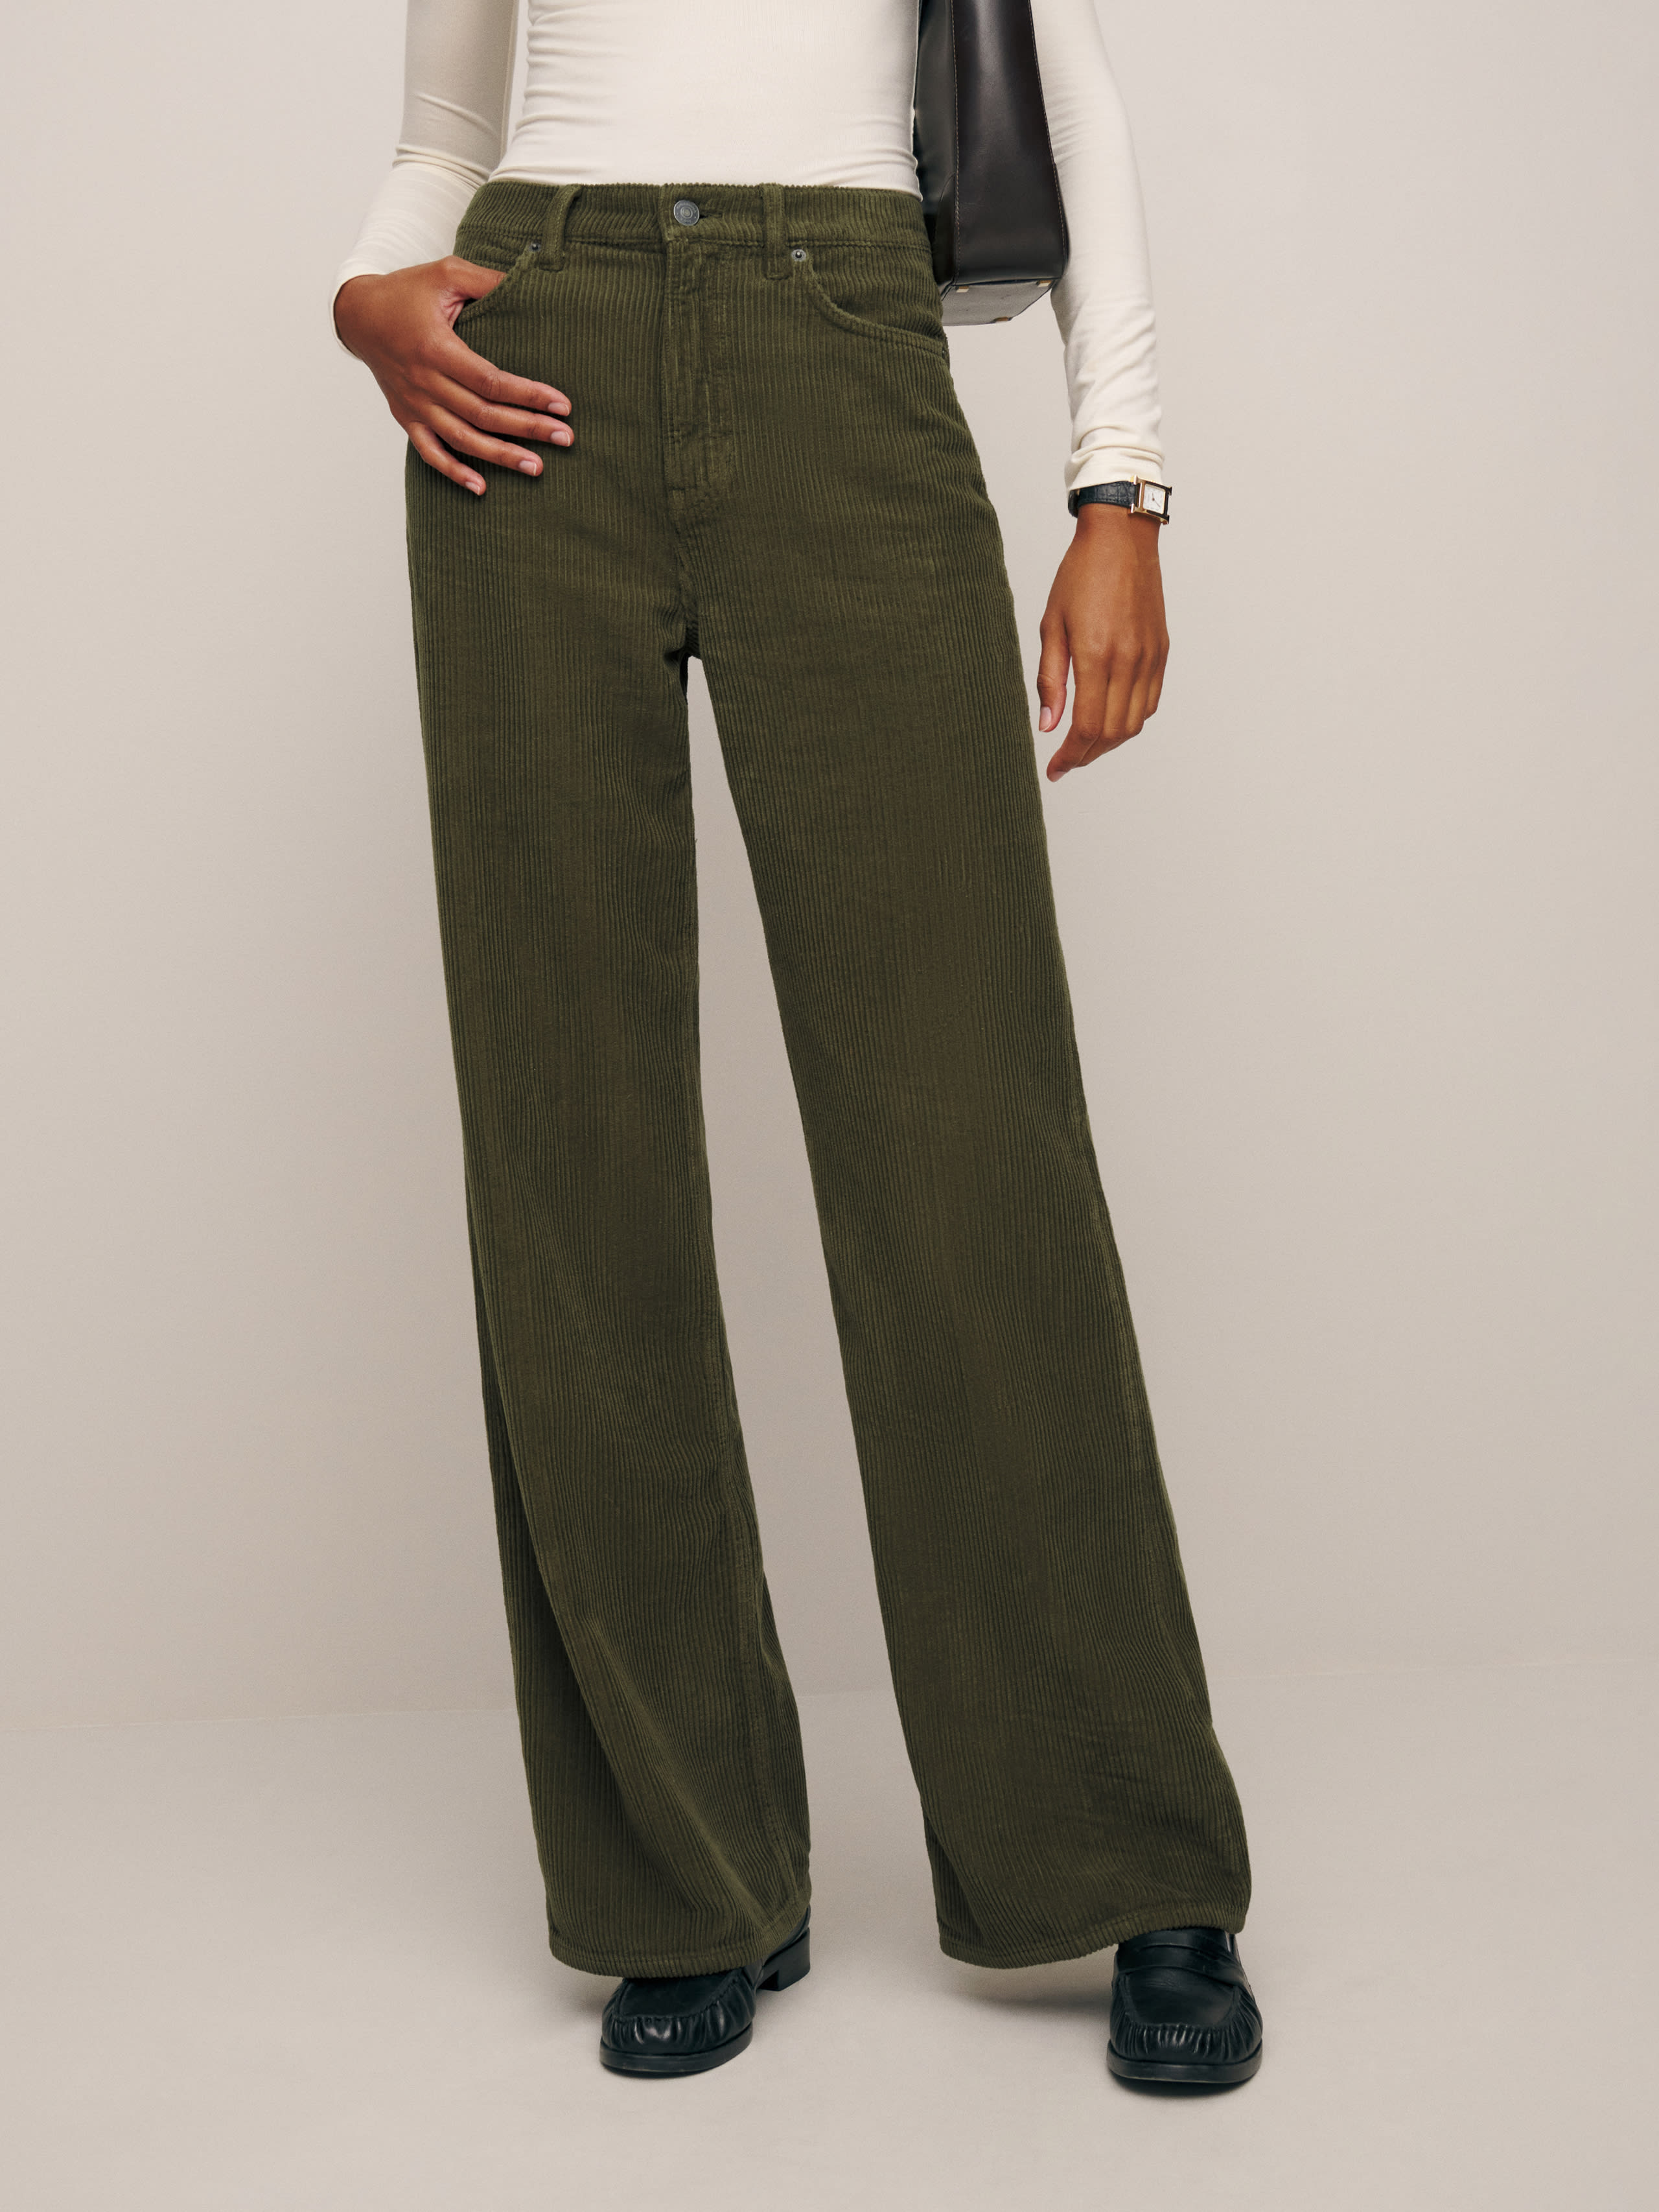 Reformation Cary High Rise Slouchy Wide Leg Corduroy Pants In Dark Olive